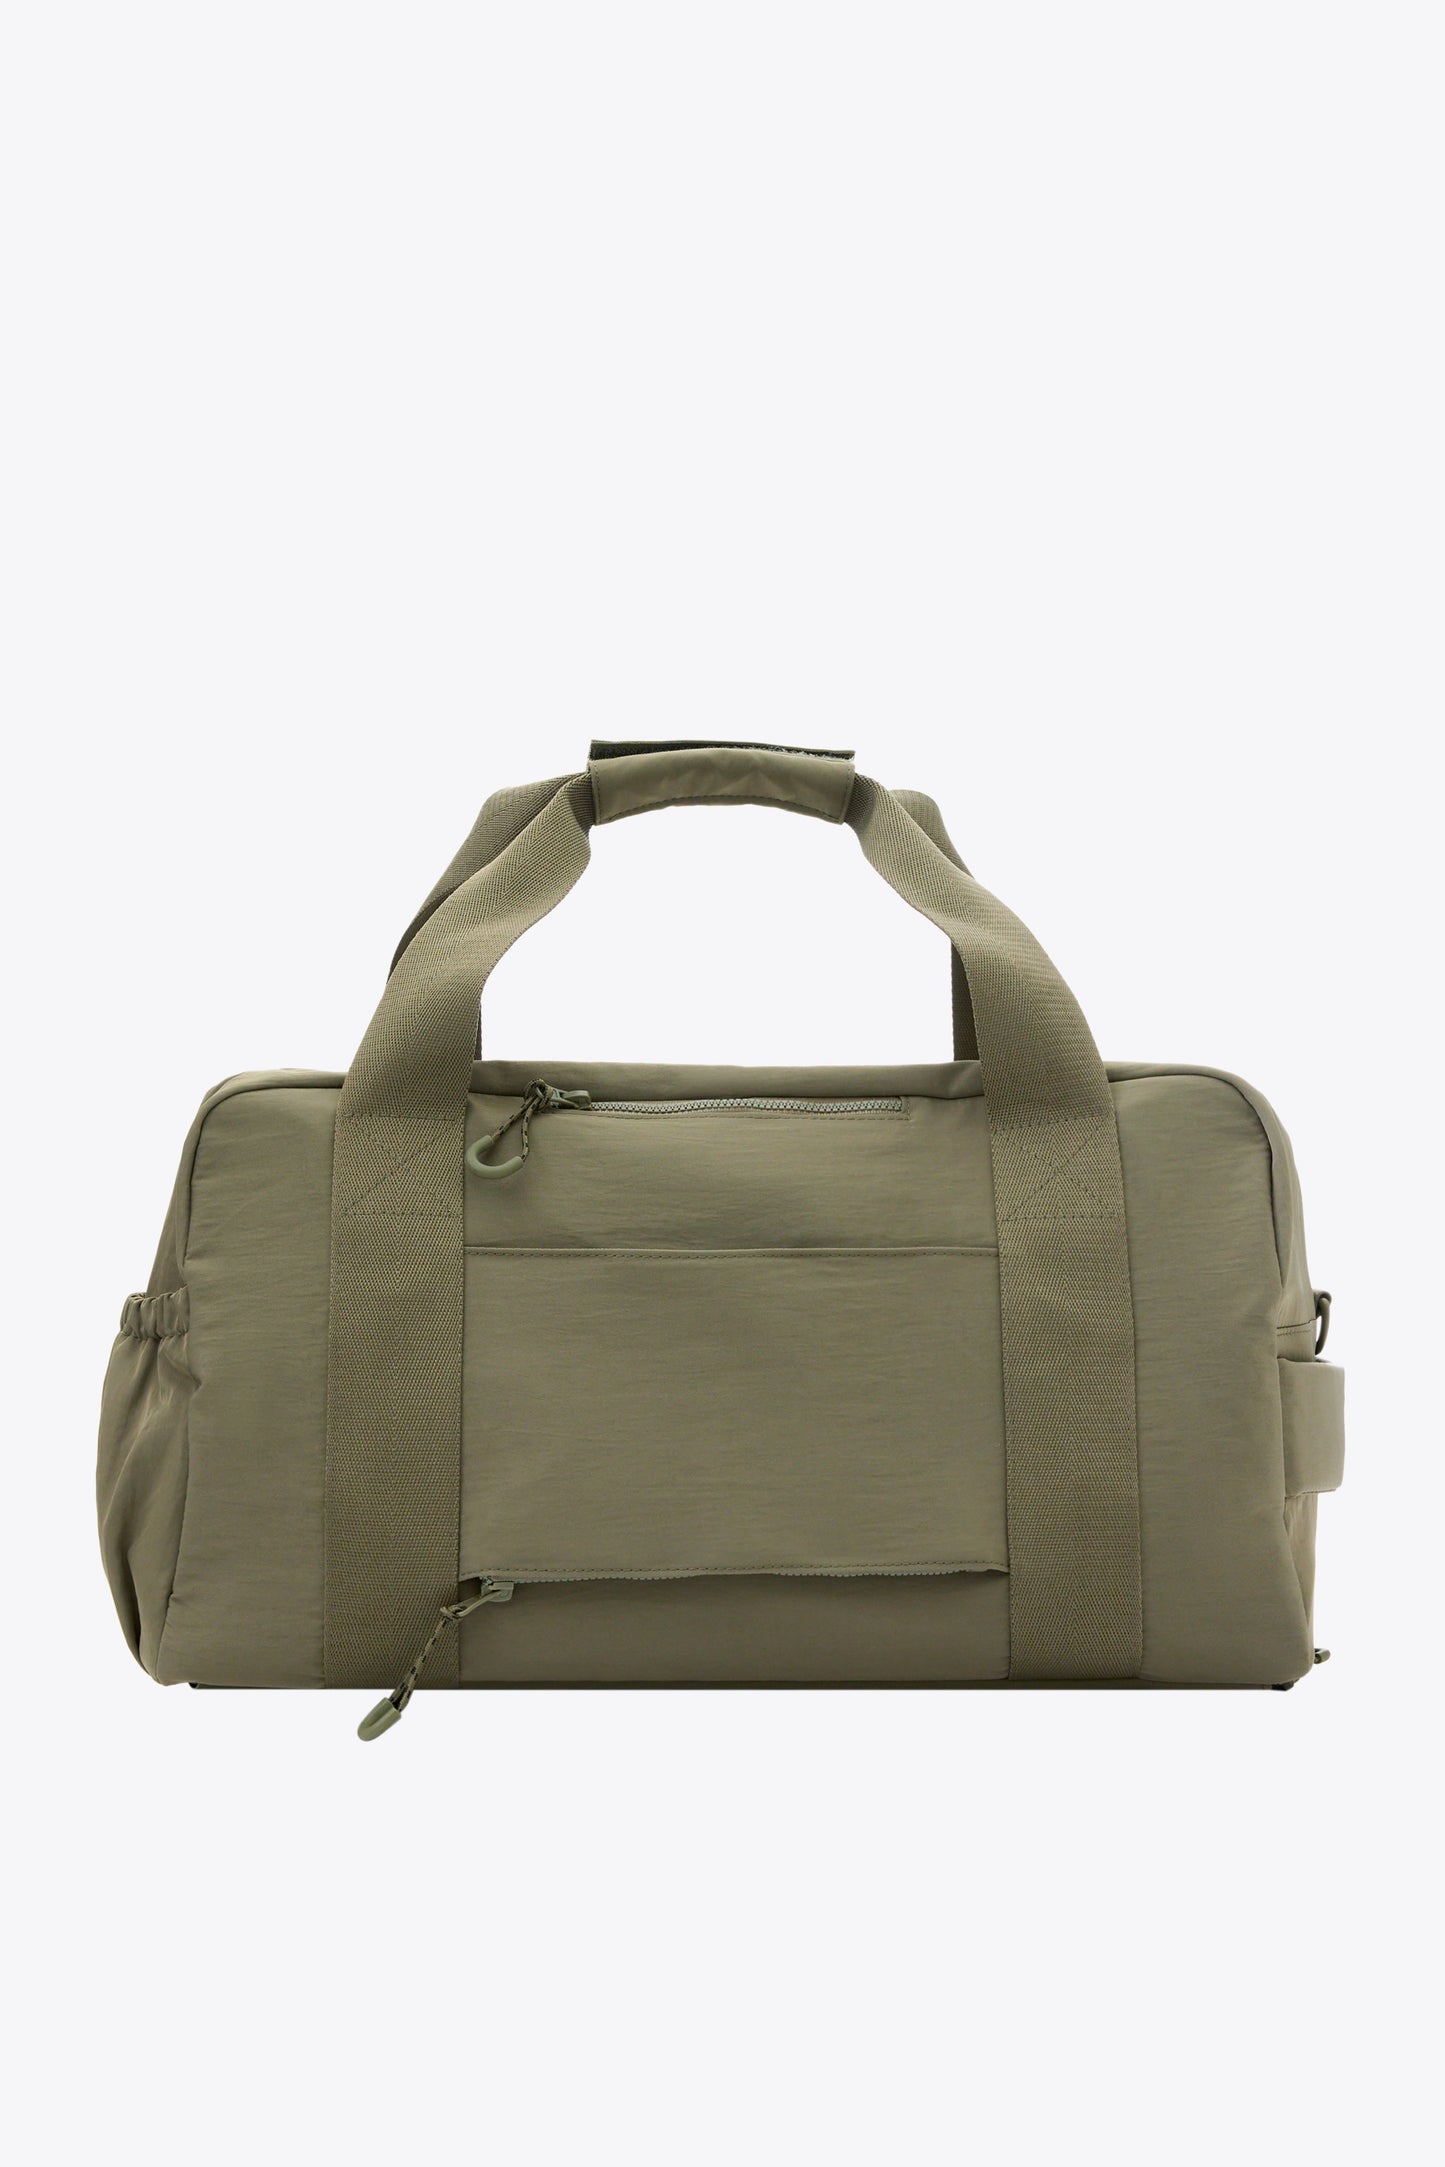 The Sport Duffle in Olive